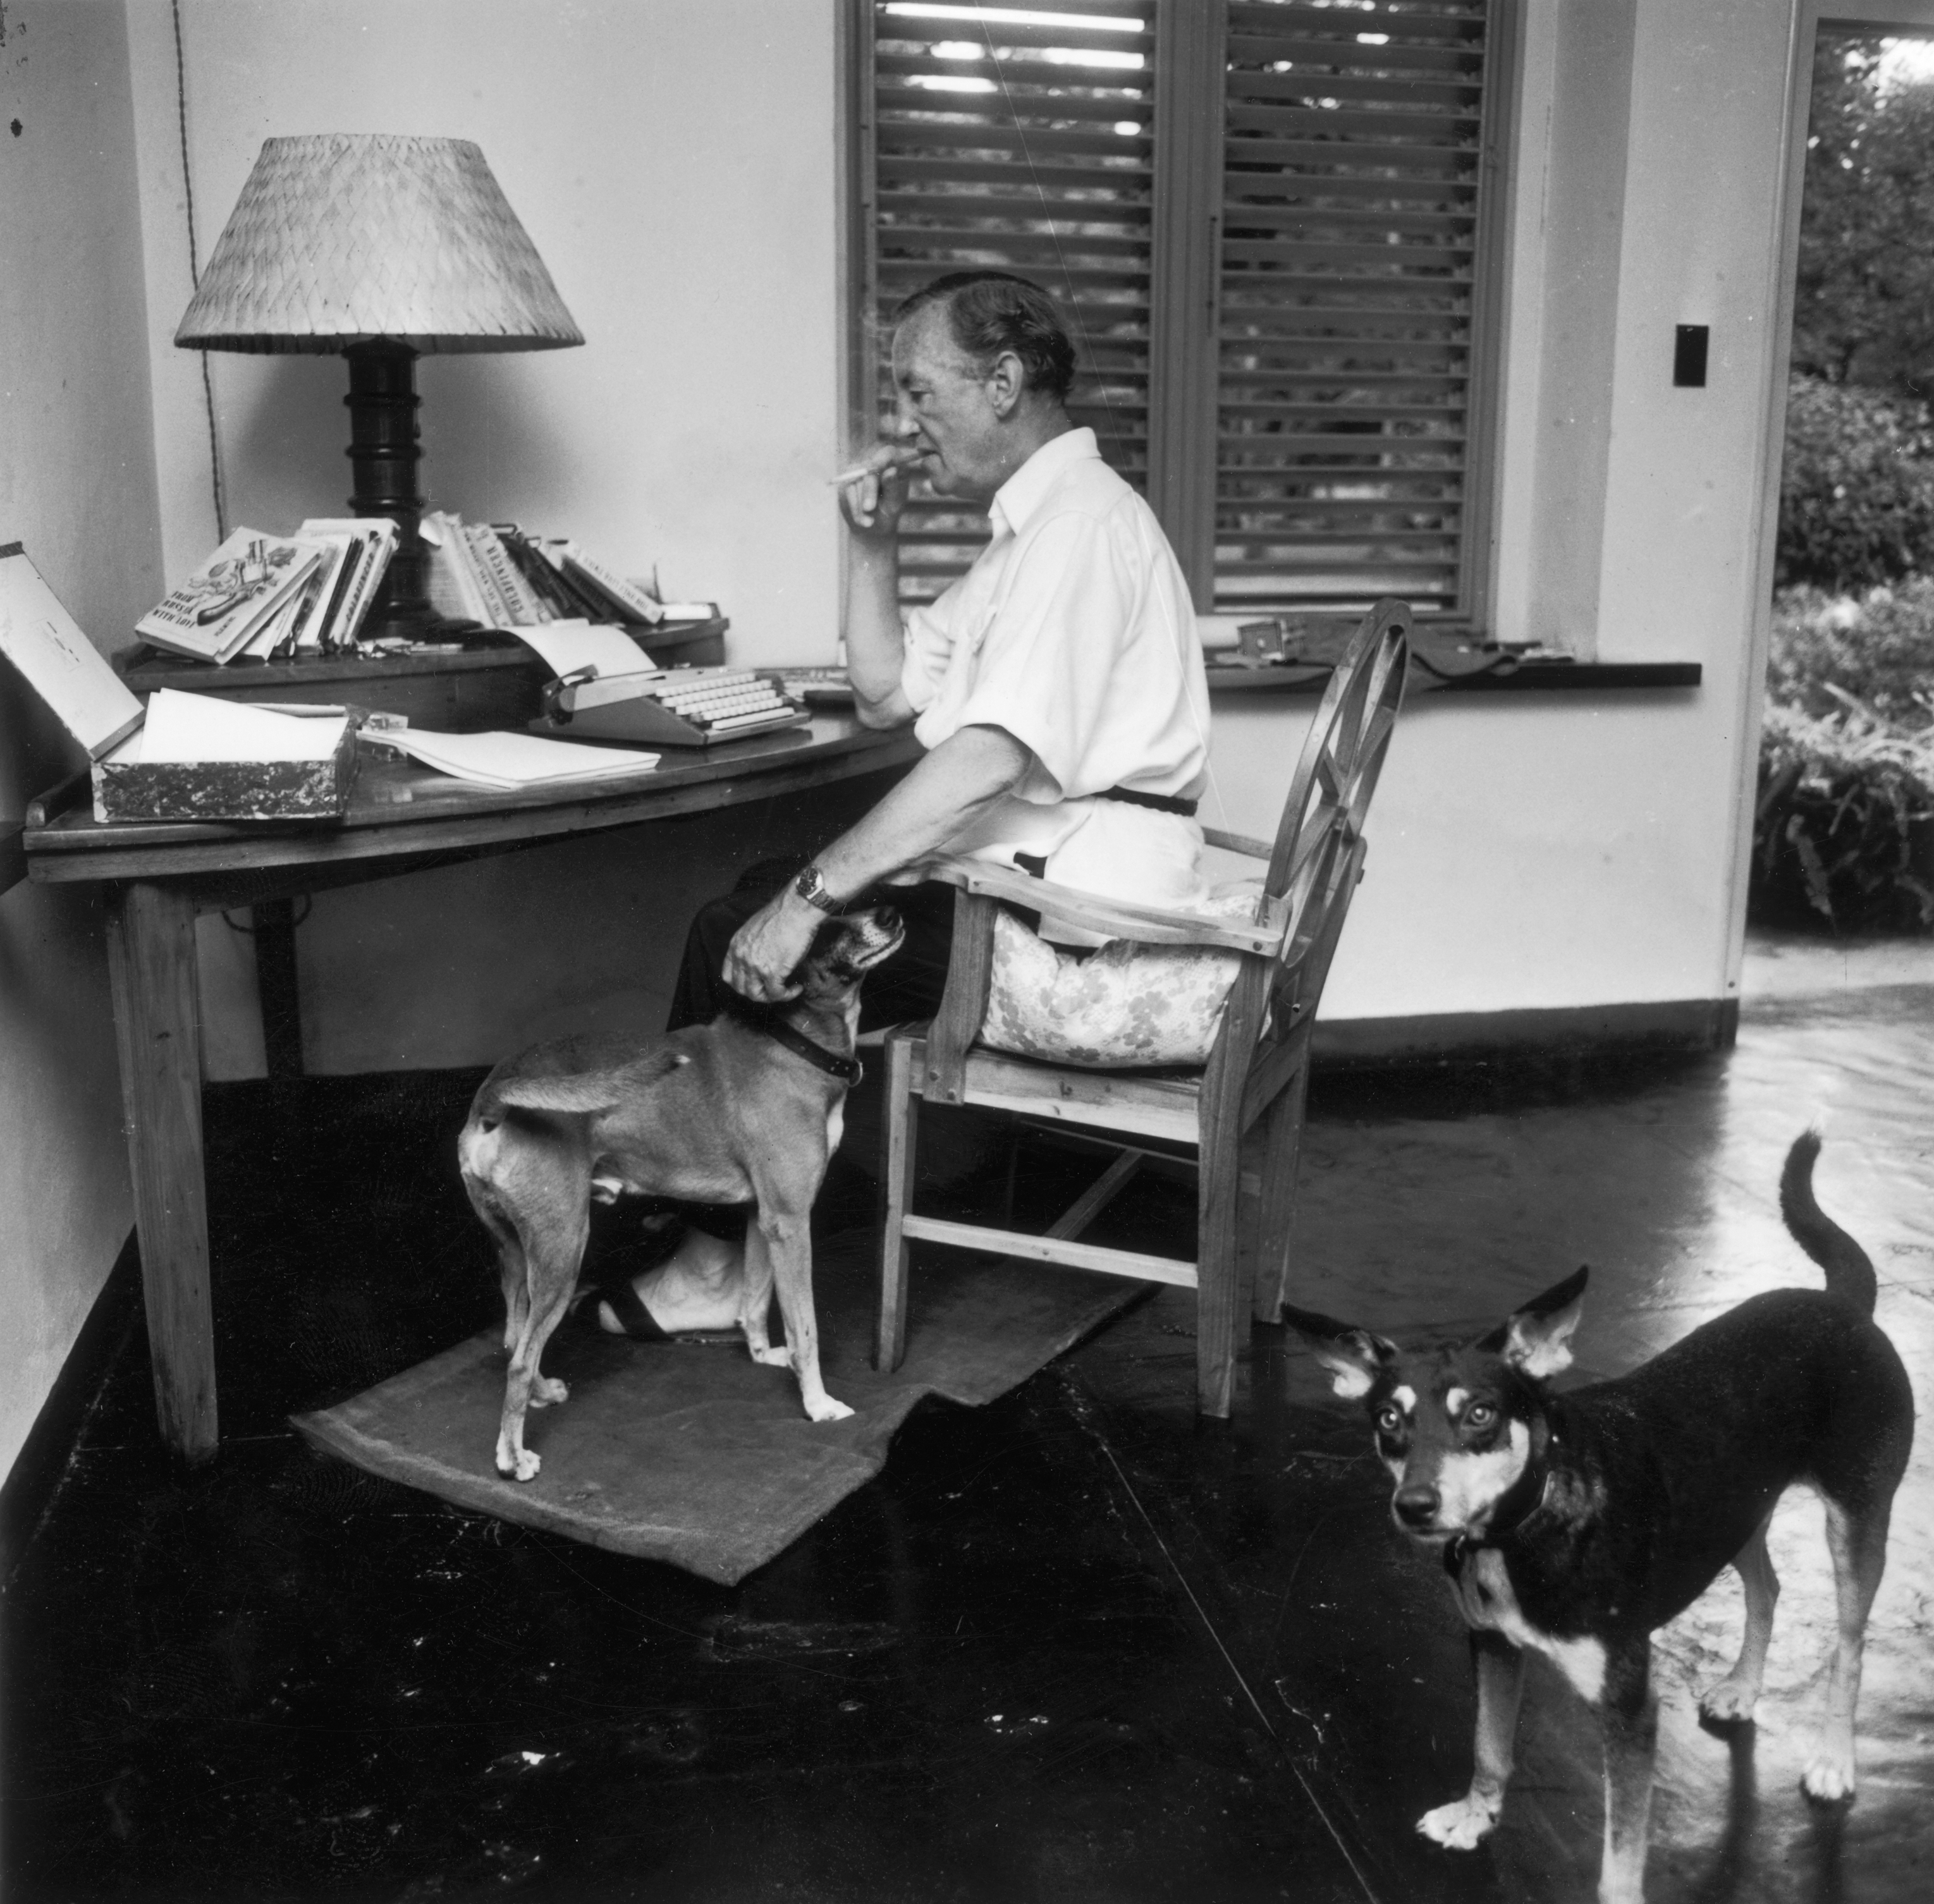 23rd February 1964: English writer Ian Fleming (1908 - 1964), best known for his James Bond novels, in his study at Goldeneye, his Jamaican home. (Photo by Harry Benson/Express/Getty Images)